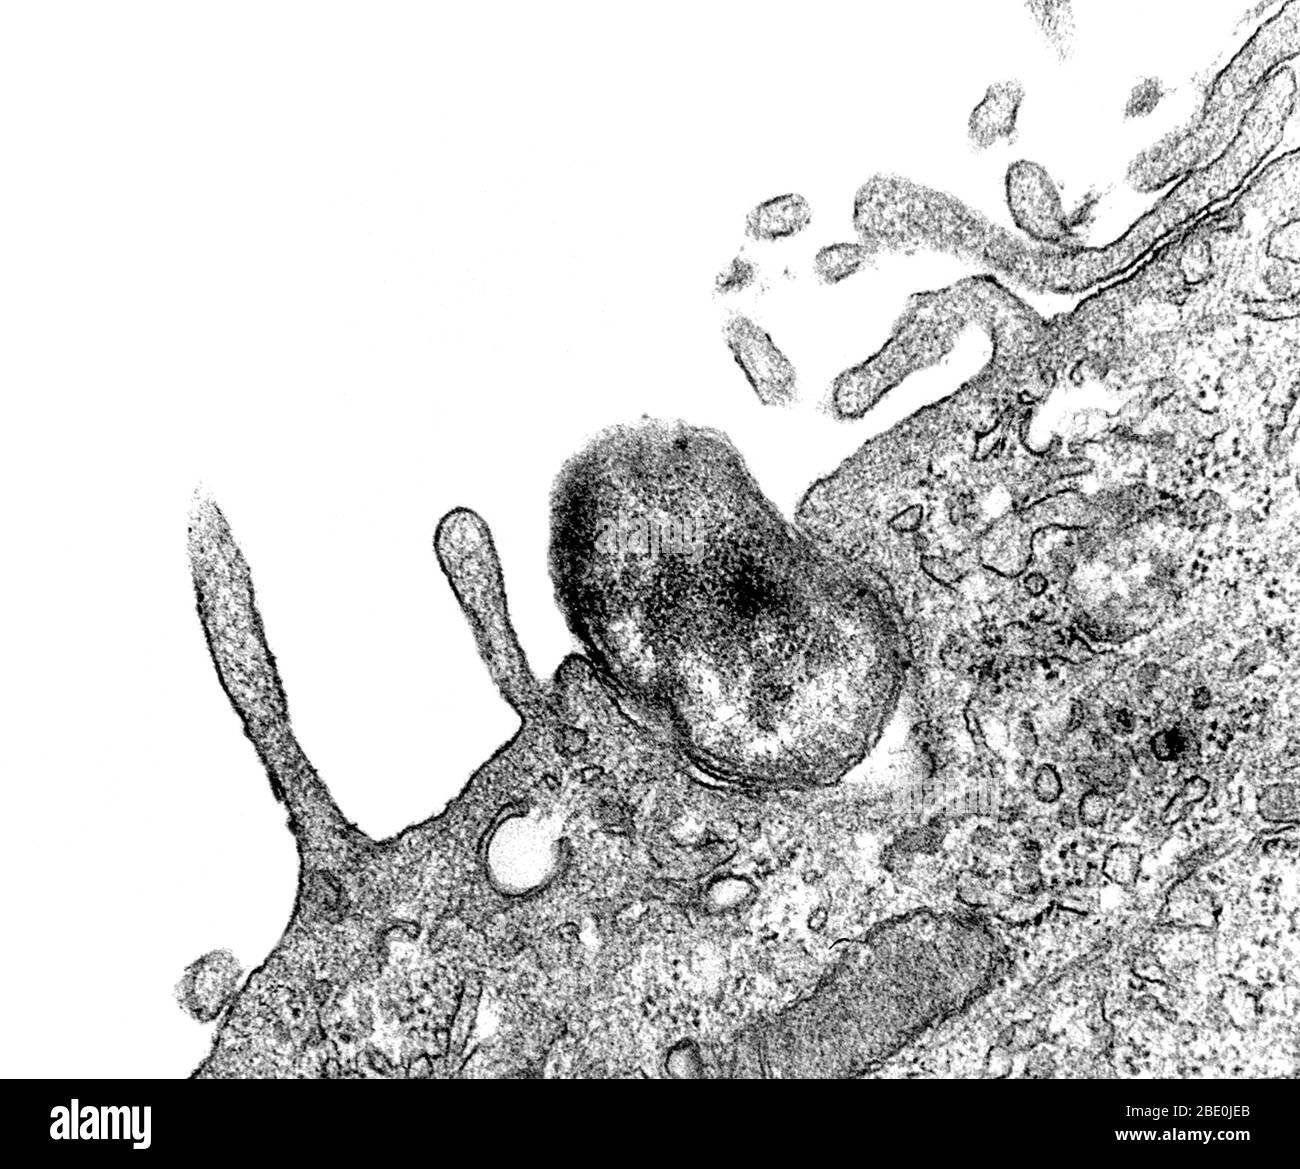 Transmission Electron Microscope (TEM) image captured as the process of phagocytosis was underway. Here, you are able to see as an Orientia tsutsugamushi bacterium, formerly known as Rickettsia tsutsugamushi, was being ingested by a mouse peritoneal mesothelial cell. Note how the would-be host cell membrane had not yet entirely enveloped the bacterium. Magnification: unknown. Stock Photo